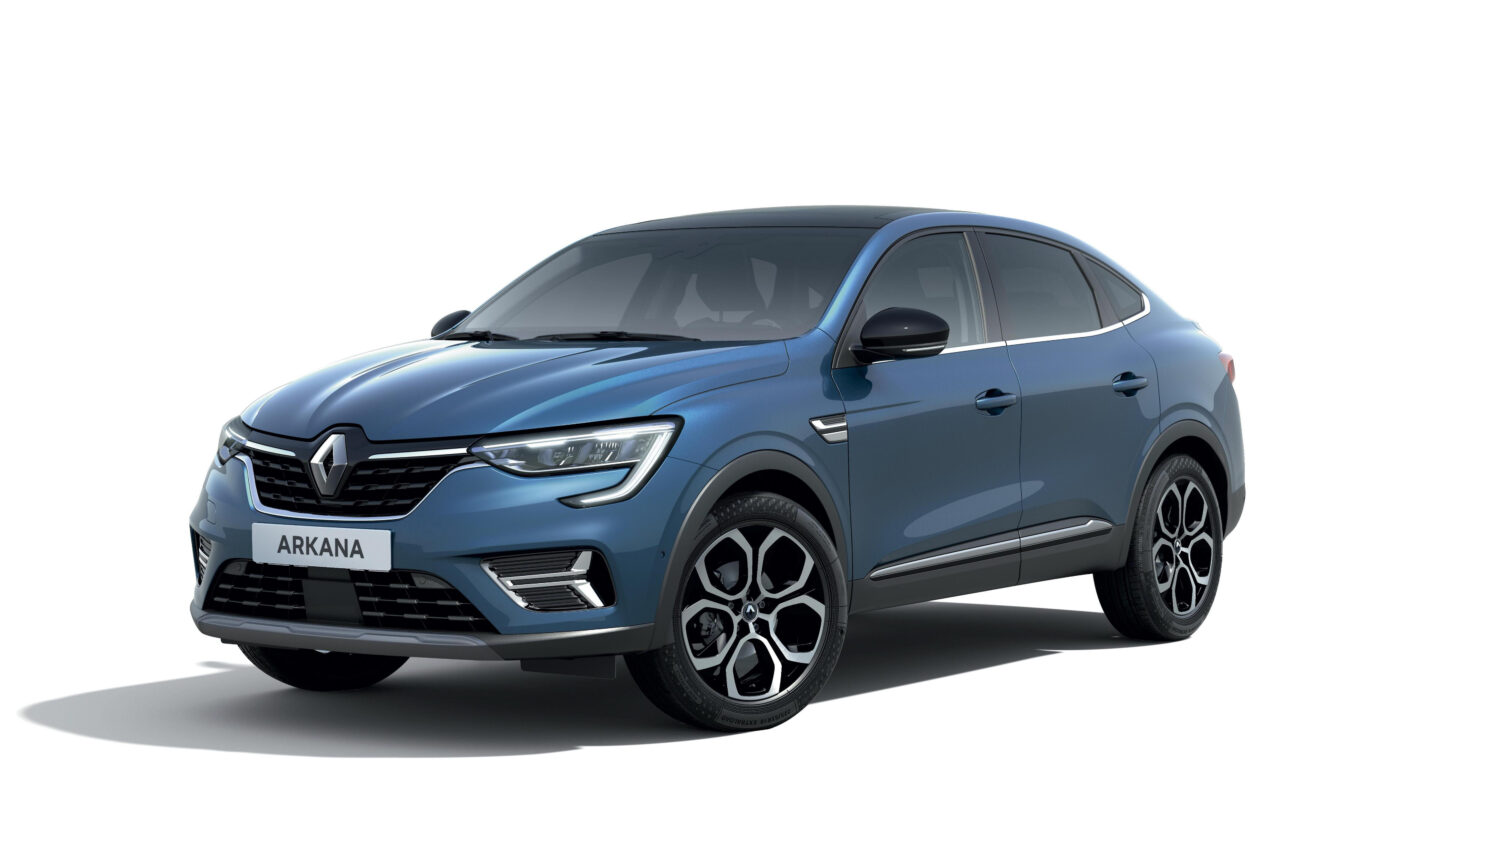 2022 - Story Renault - Colourist: A trade unto its own at Renault Design